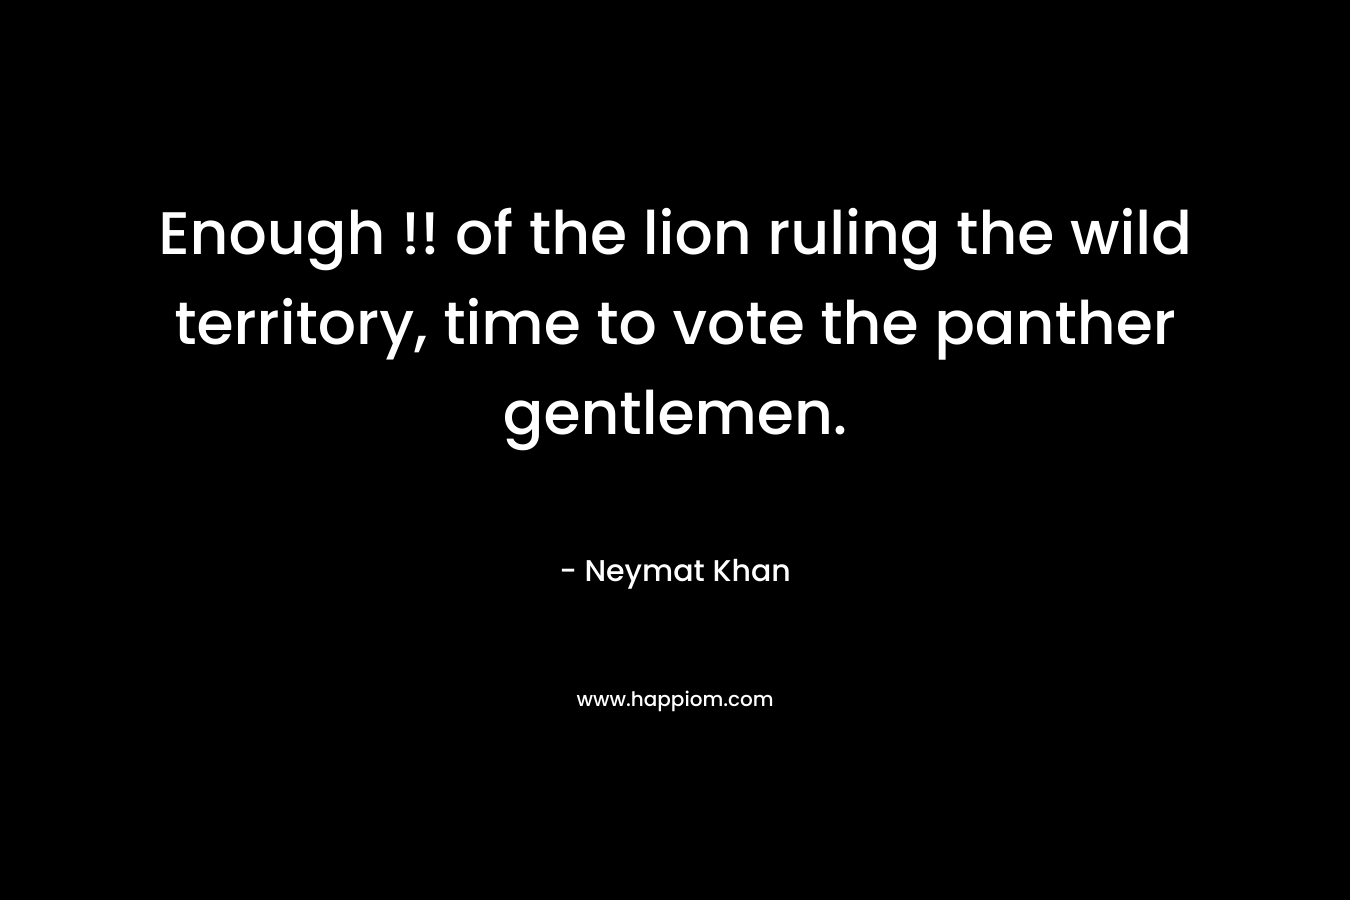 Enough !! of the lion ruling the wild territory, time to vote the panther gentlemen.